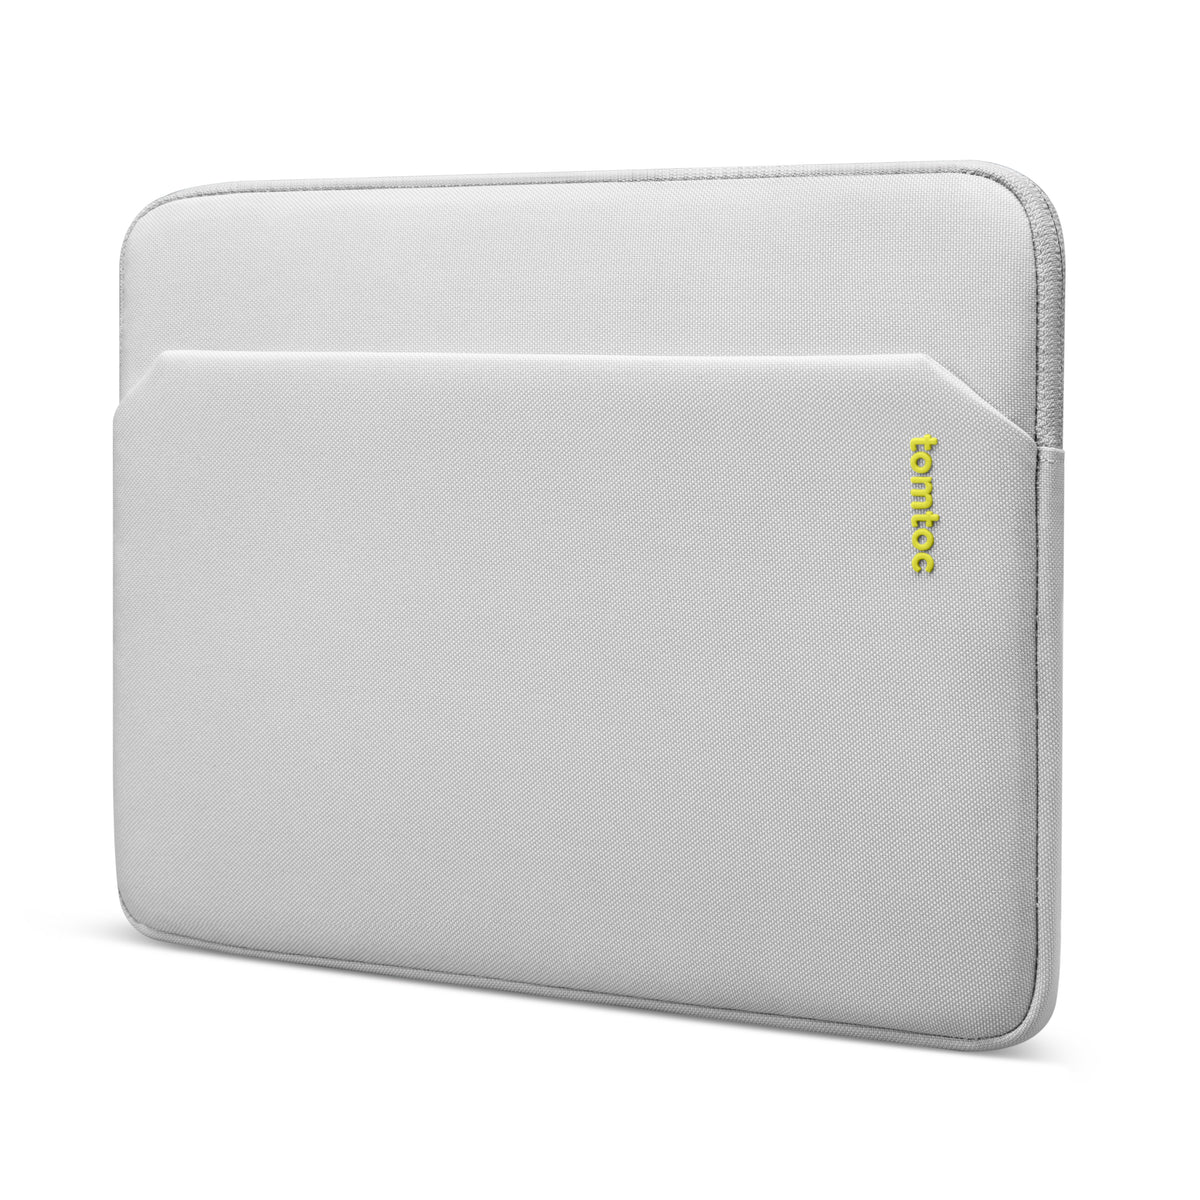 tomtoc 12.9 Inch Tablet Sleeve Bag - Pad Pro 12.9 with Magic Keyboard - Light Gray